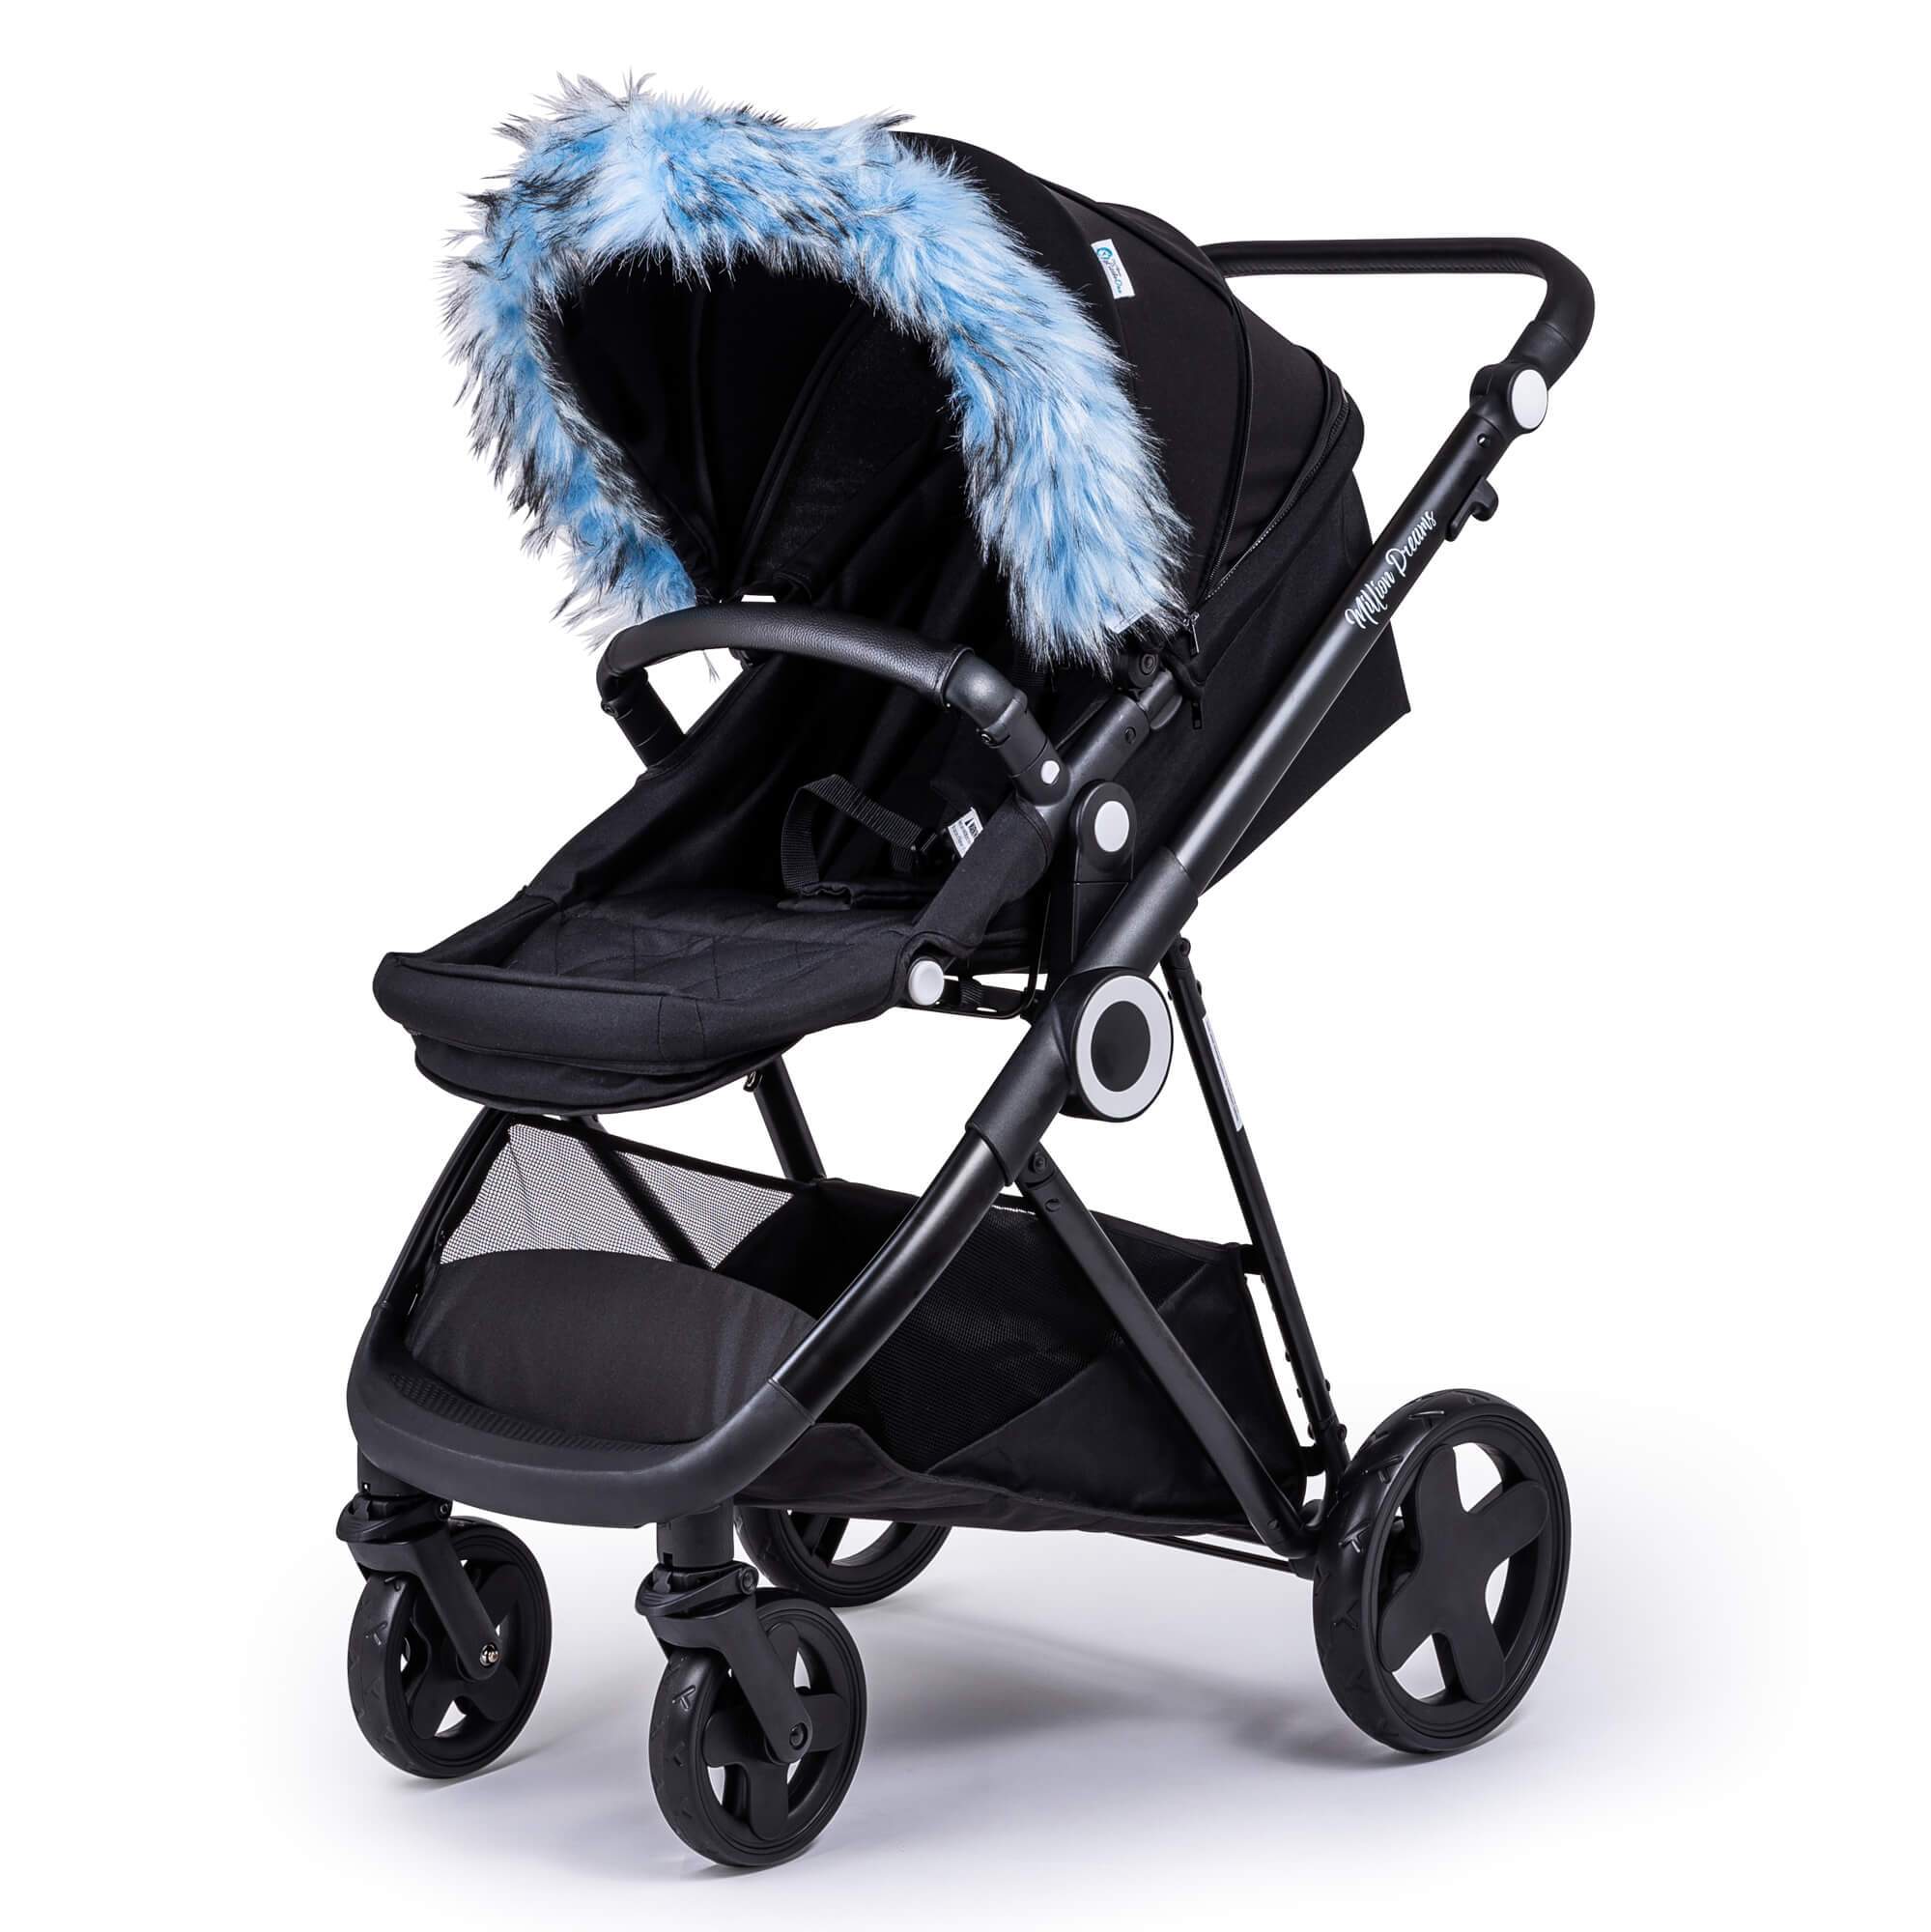 Pram Fur Hood Trim Attachment for Pushchair Compatible with Inglesina - Light Blue / Fits All Models | For Your Little One